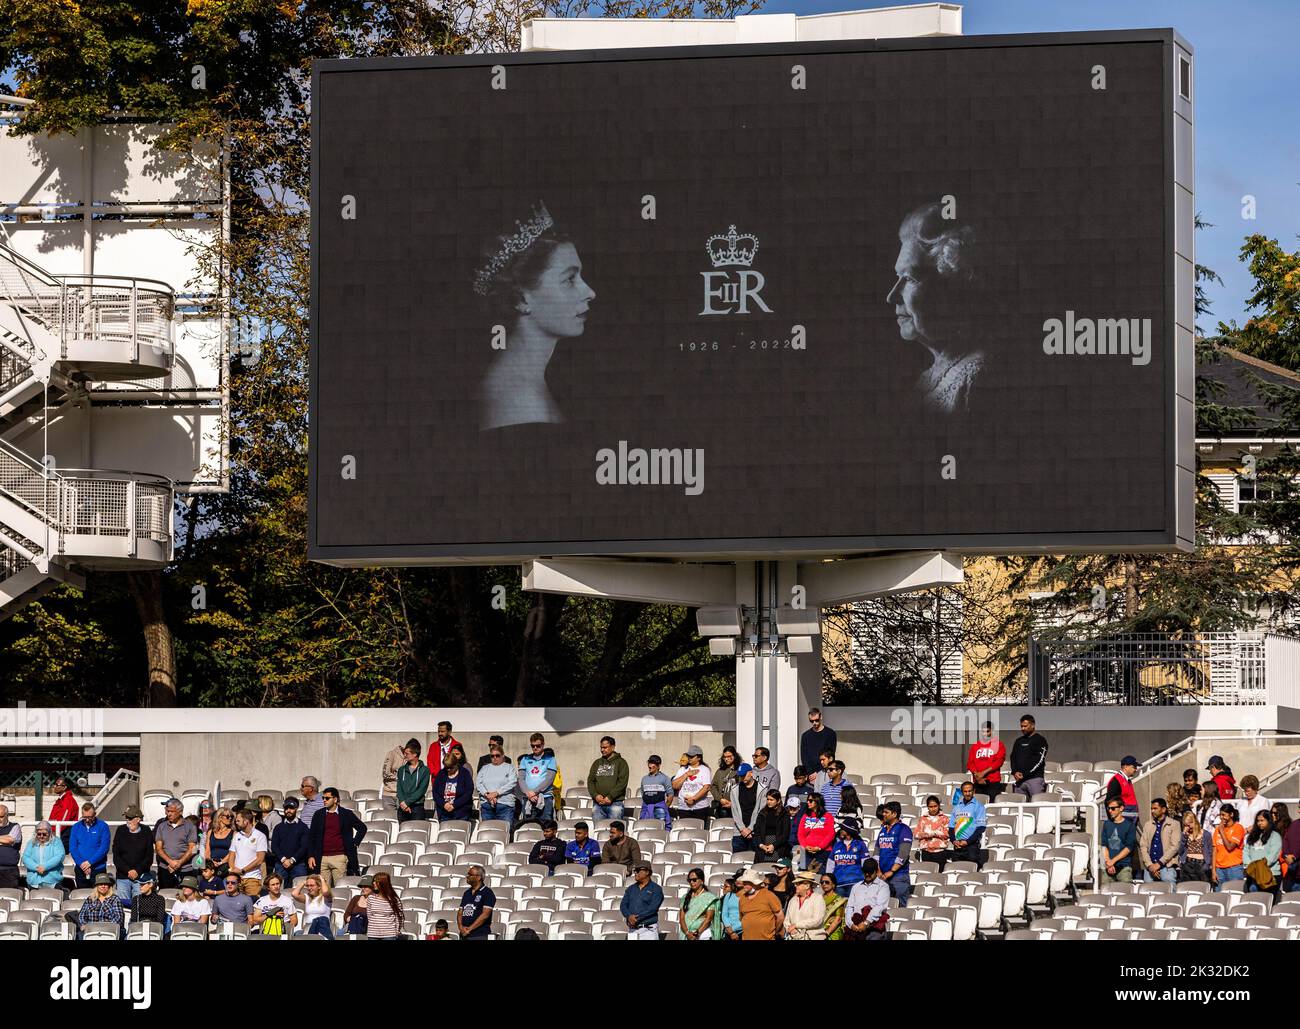 Images of Queen Elizabeth II are displayed on the giant screens ahead of the third women's one day international match at Lord's, London. Picture date: Saturday September 24, 2022. Stock Photo